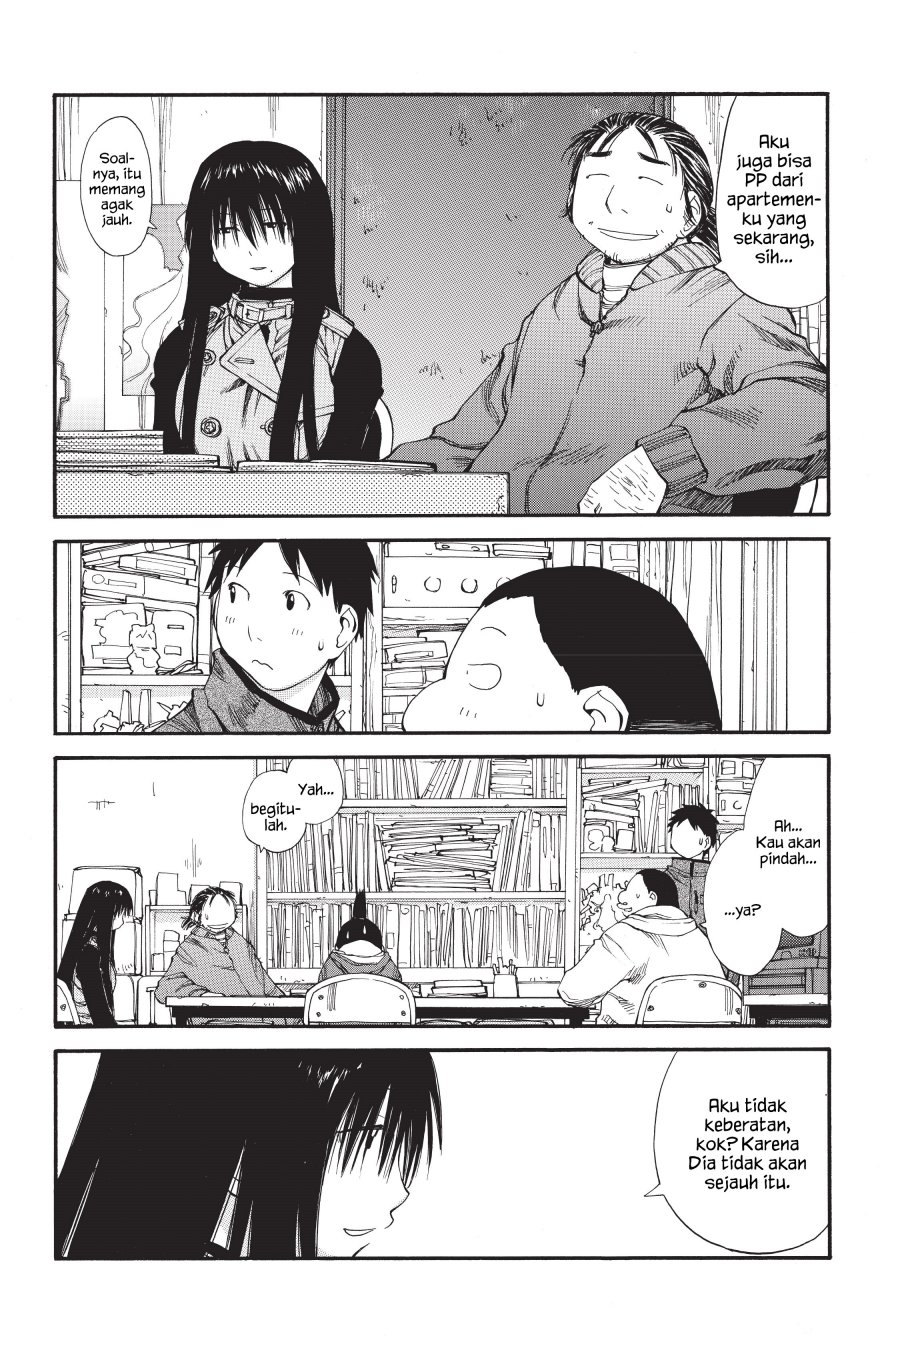 Genshiken – The Society for the Study of Modern Visual Culture Chapter 36 Image 4